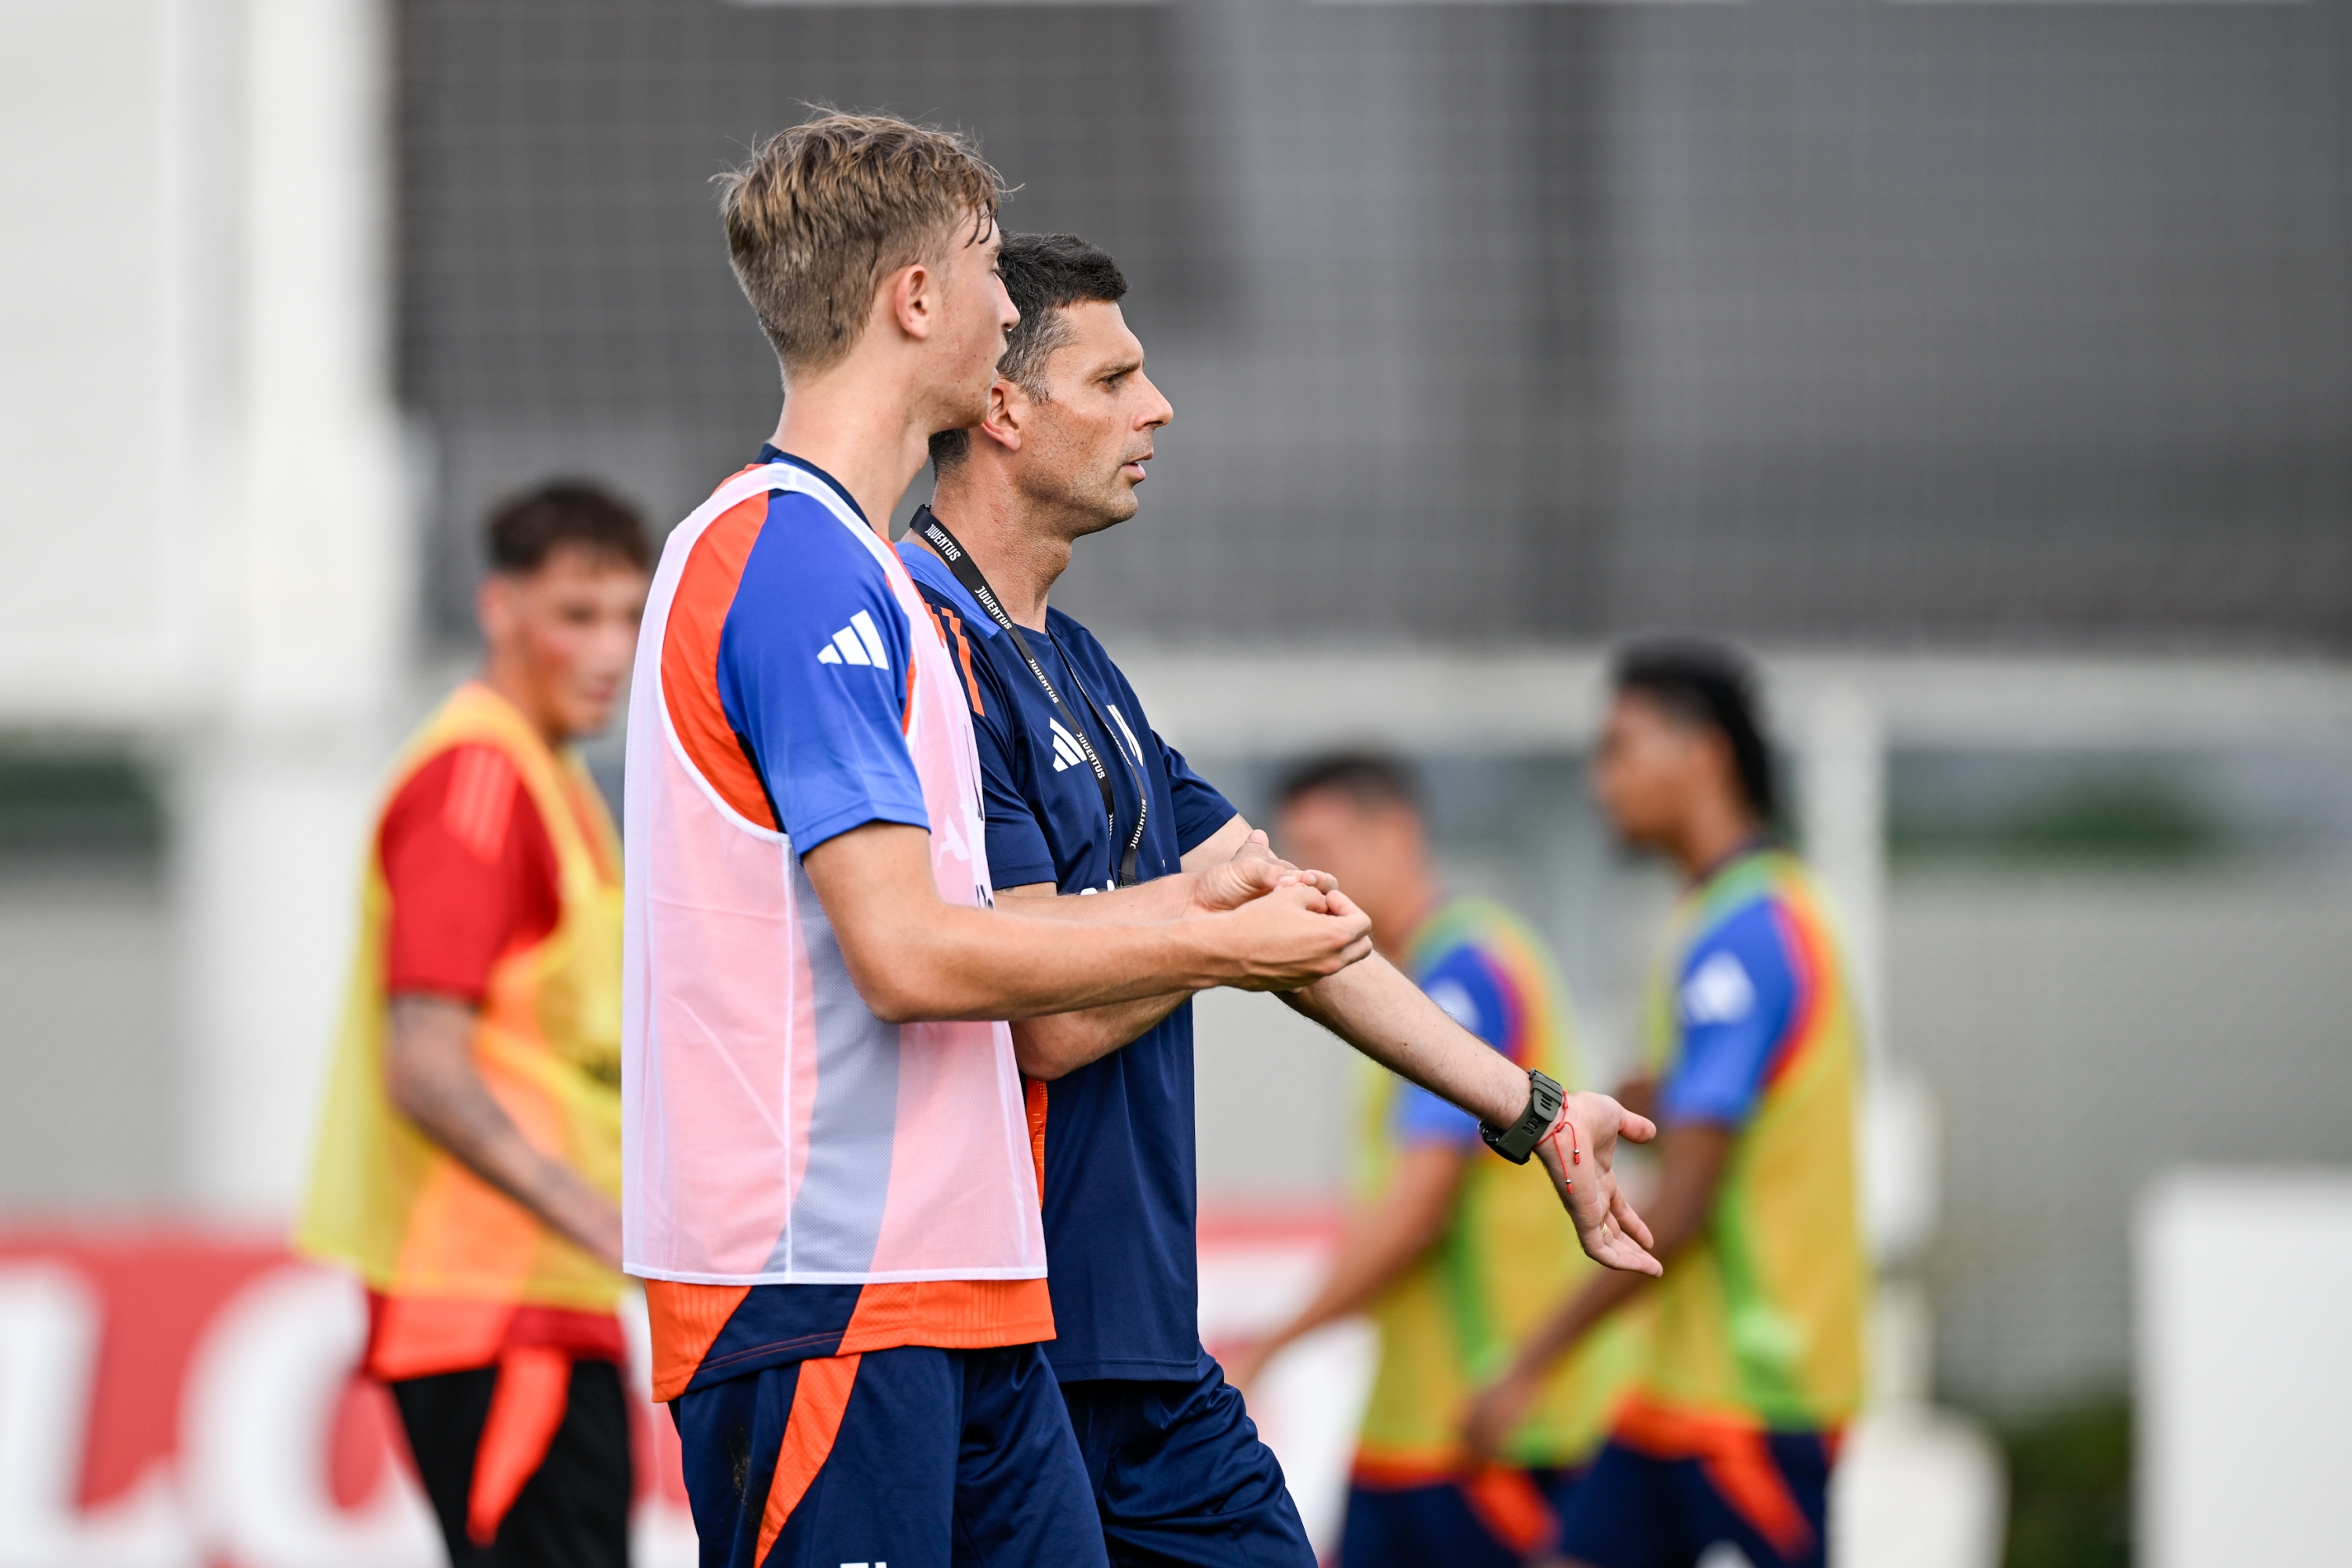 TURIN, ITALY - JULY 10: Dean Huijsen, Thiago Motta of Juventus during a training session at JTC on July 10, 2024 in Turin, Italy. (Photo by Daniele Badolato - Juventus FC/Juventus FC via Getty Images)